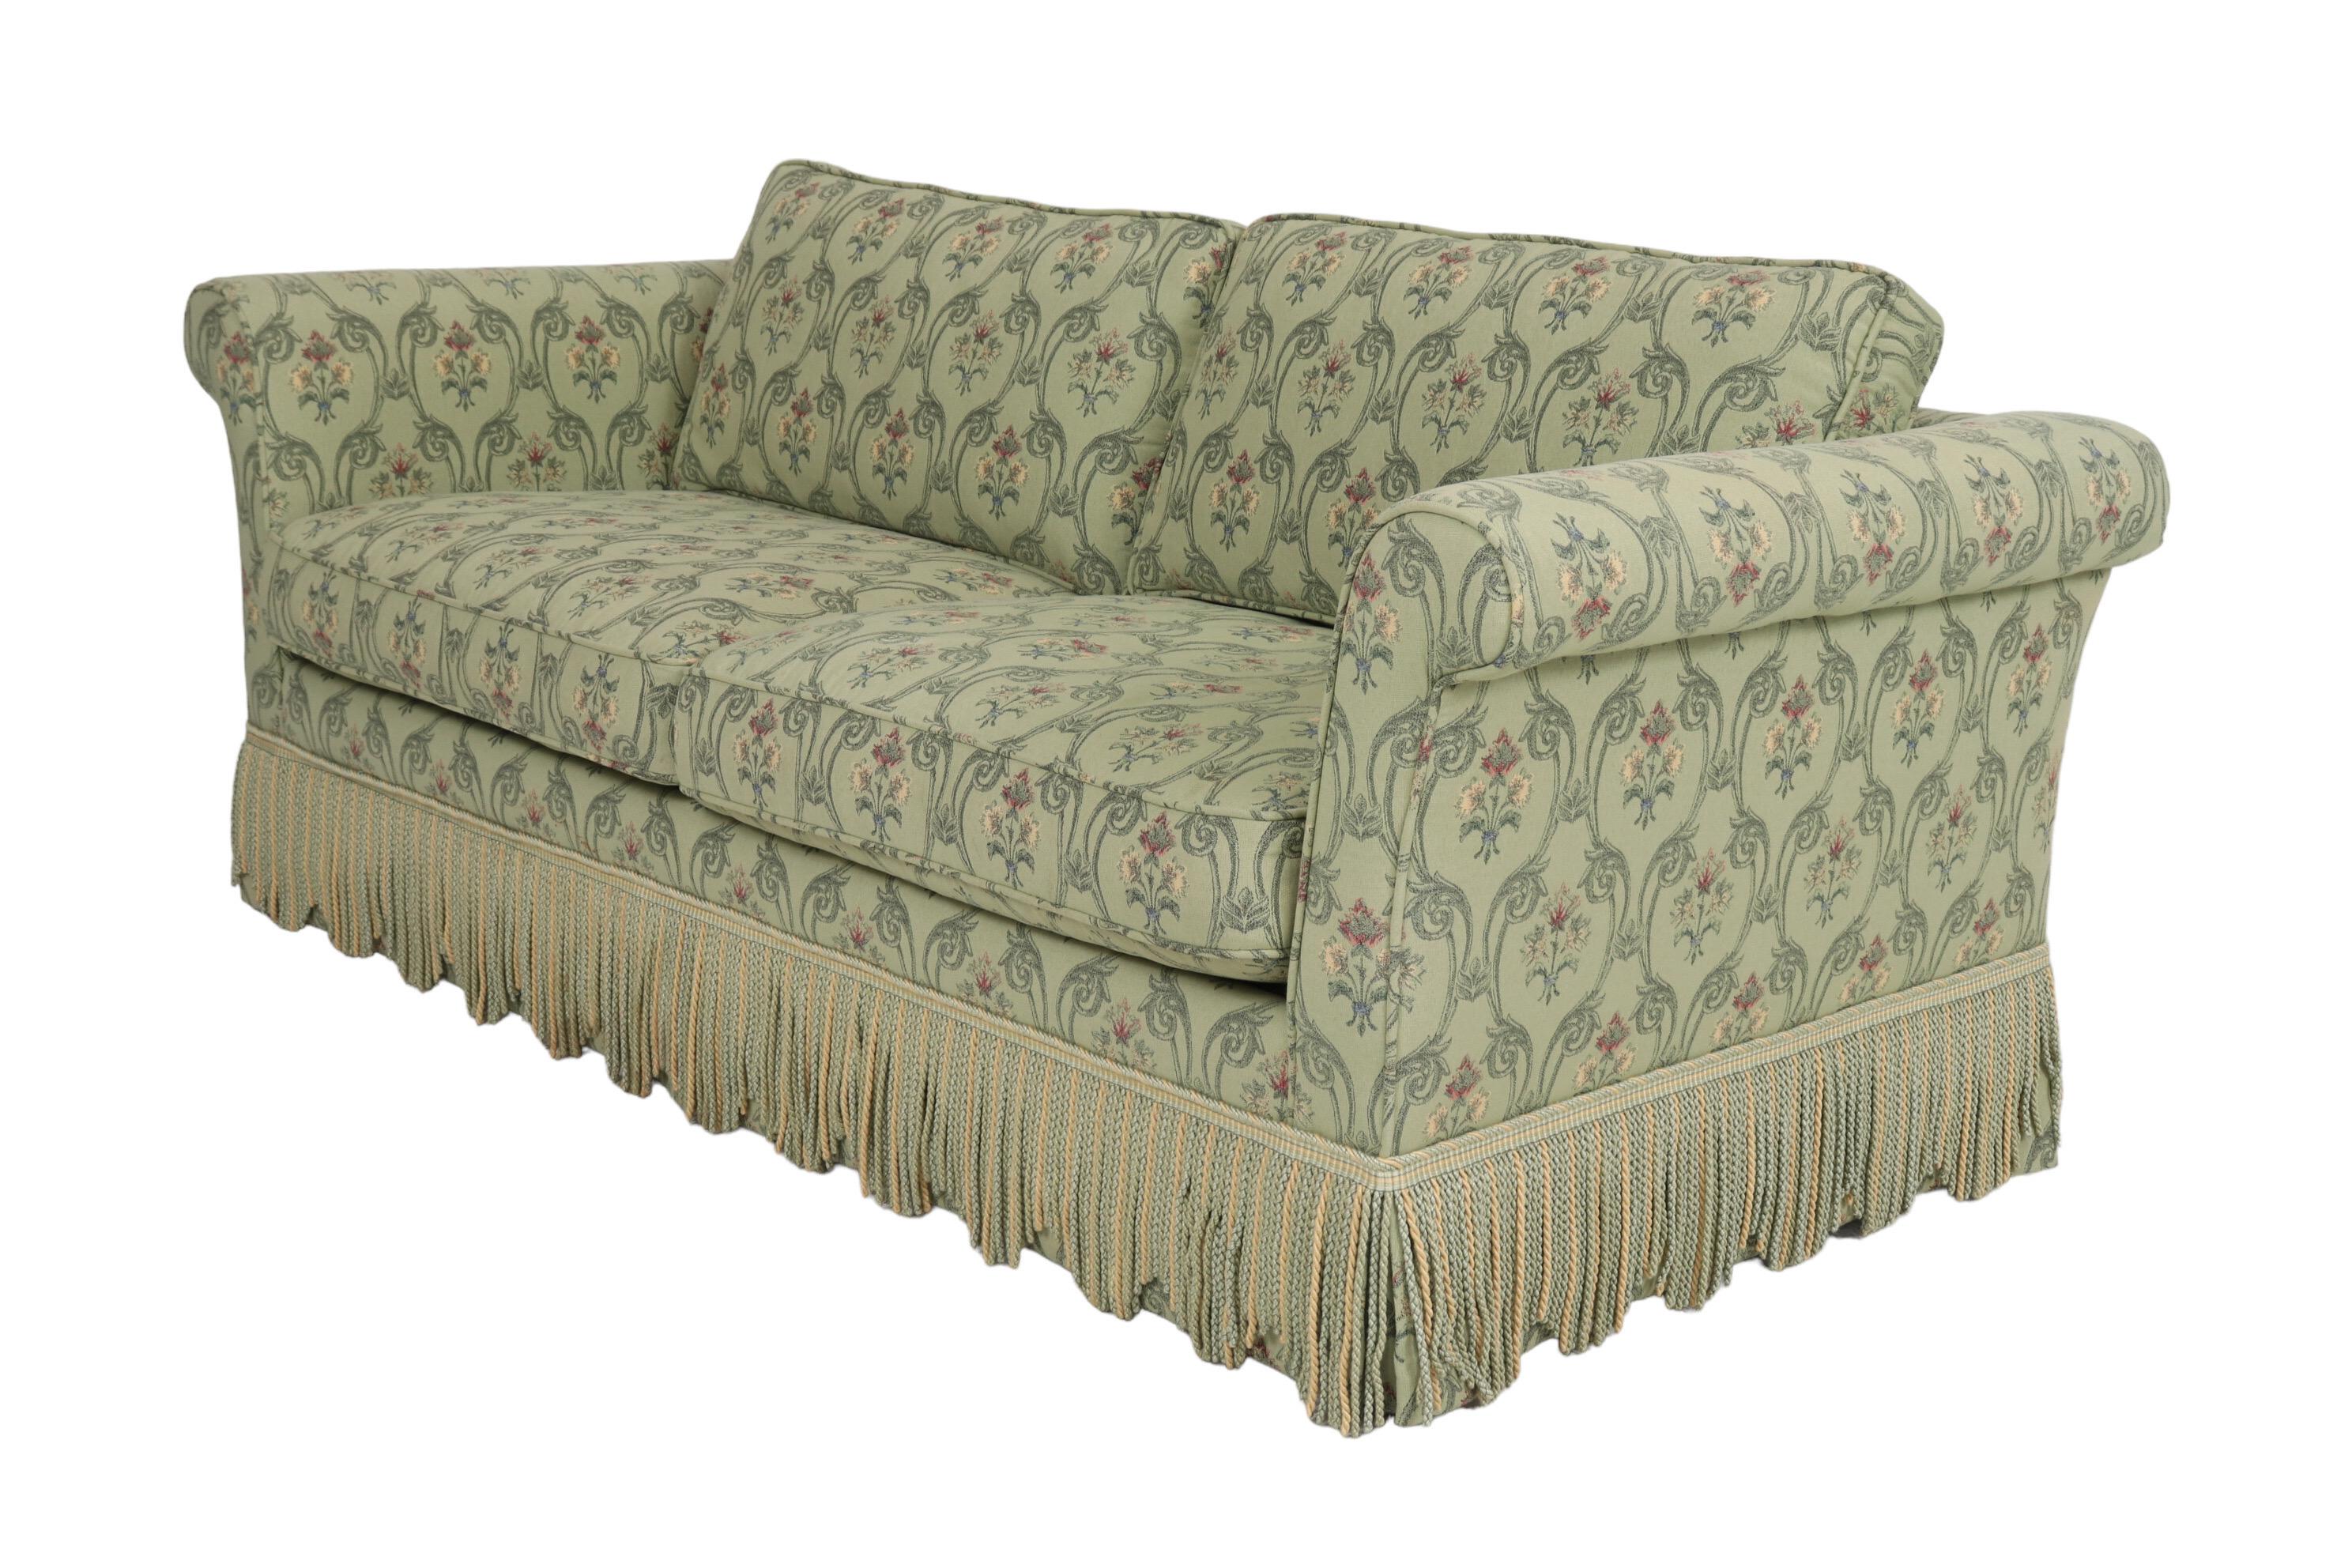 A Chesterfield style “Convertible Fashion Sofa” made by Stearns & Foster. A three-seat sleeper sofa custom upholstered by Alliance Upholstery of Springfield, Massachusetts in Robert Allen’s Camay basketweave fabric in green. Trimmed with a scalloped